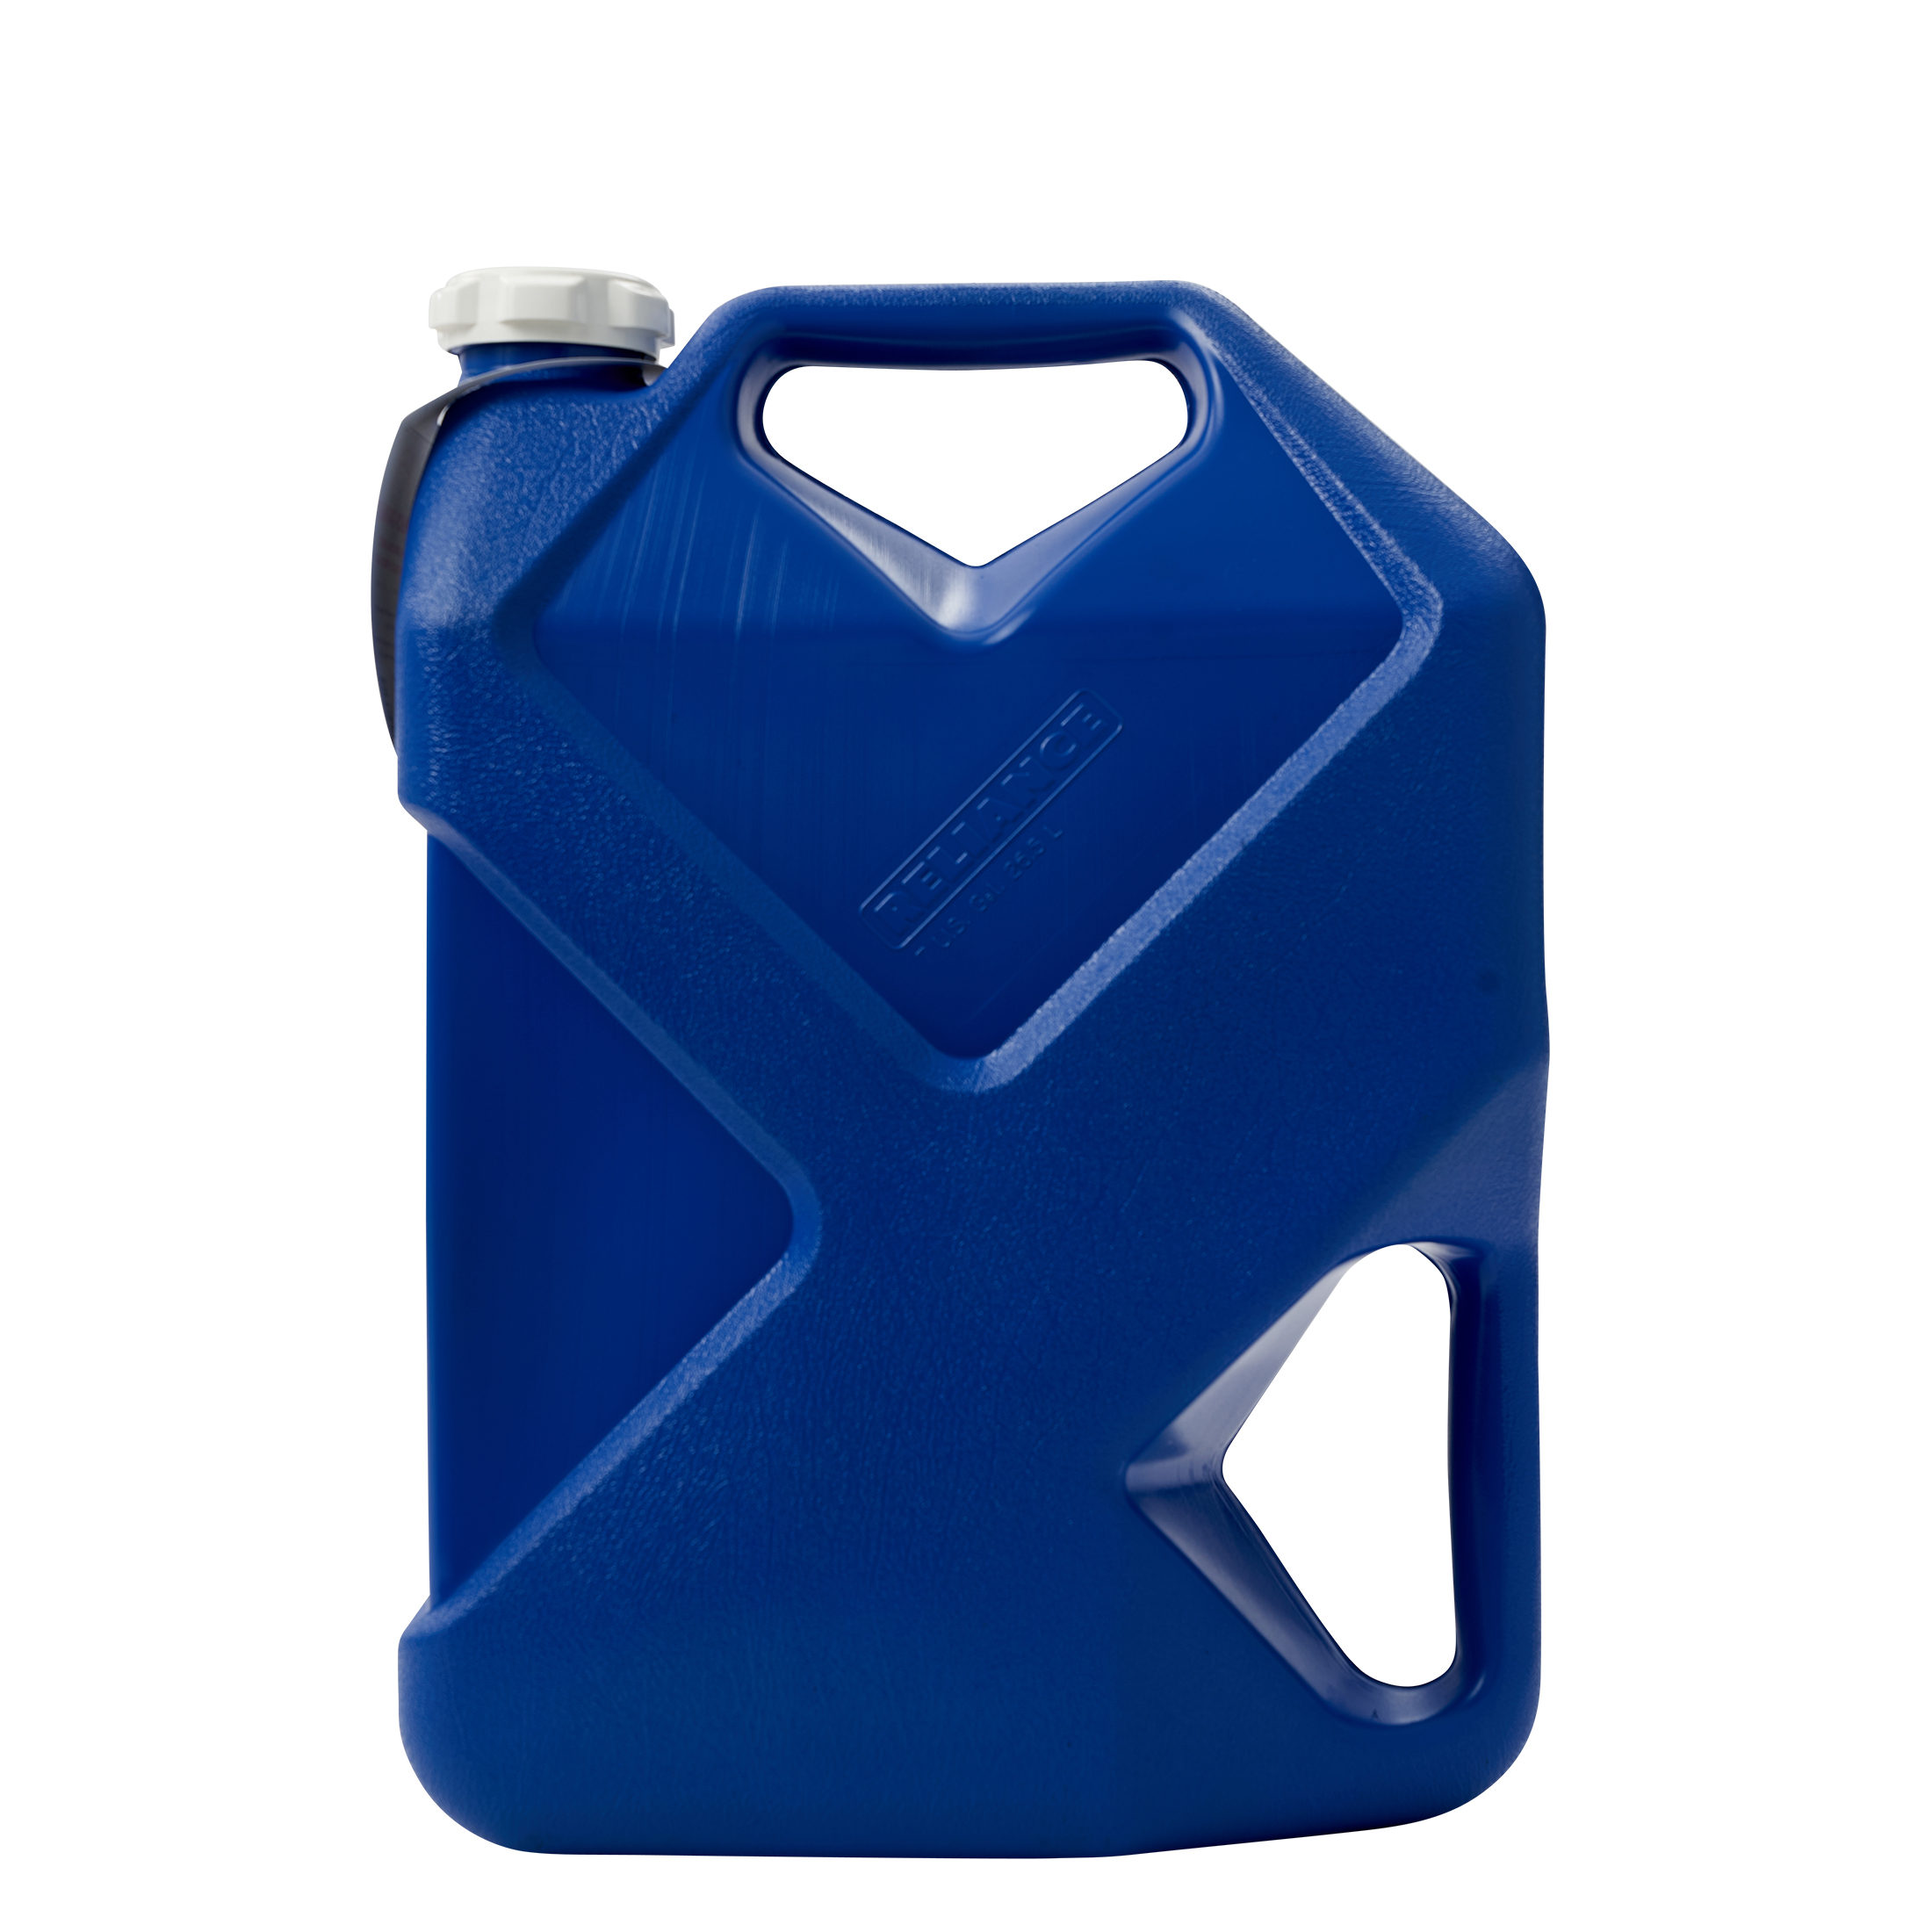 Reliance Products Jumbo-Tainer Jerry Can Style Water Container 7 Gallon, Green - image 4 of 5